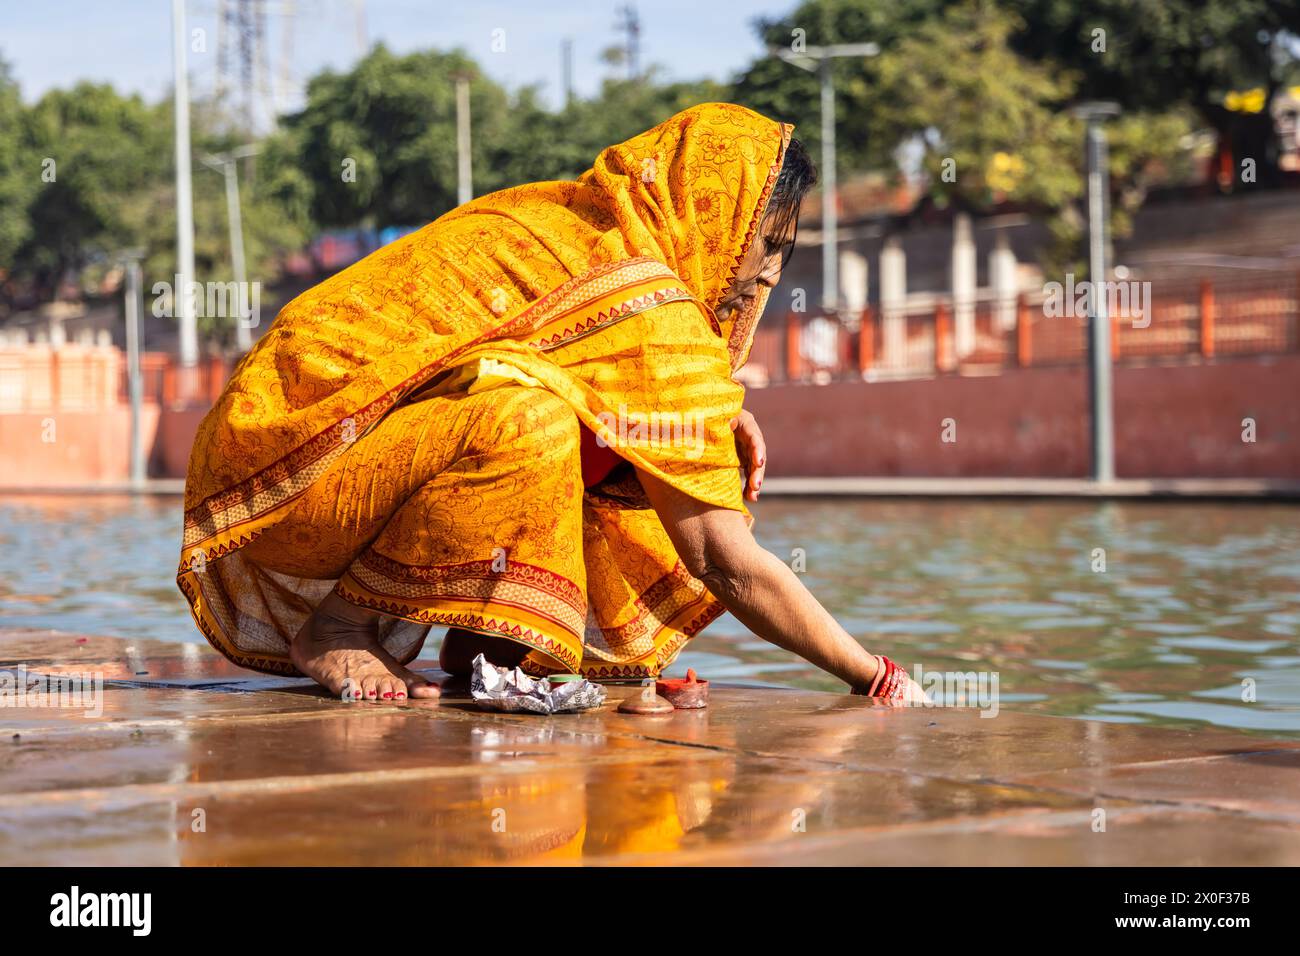 devotee praying for holy god after bathing in holy river water at morning from flat angle Stock Photo